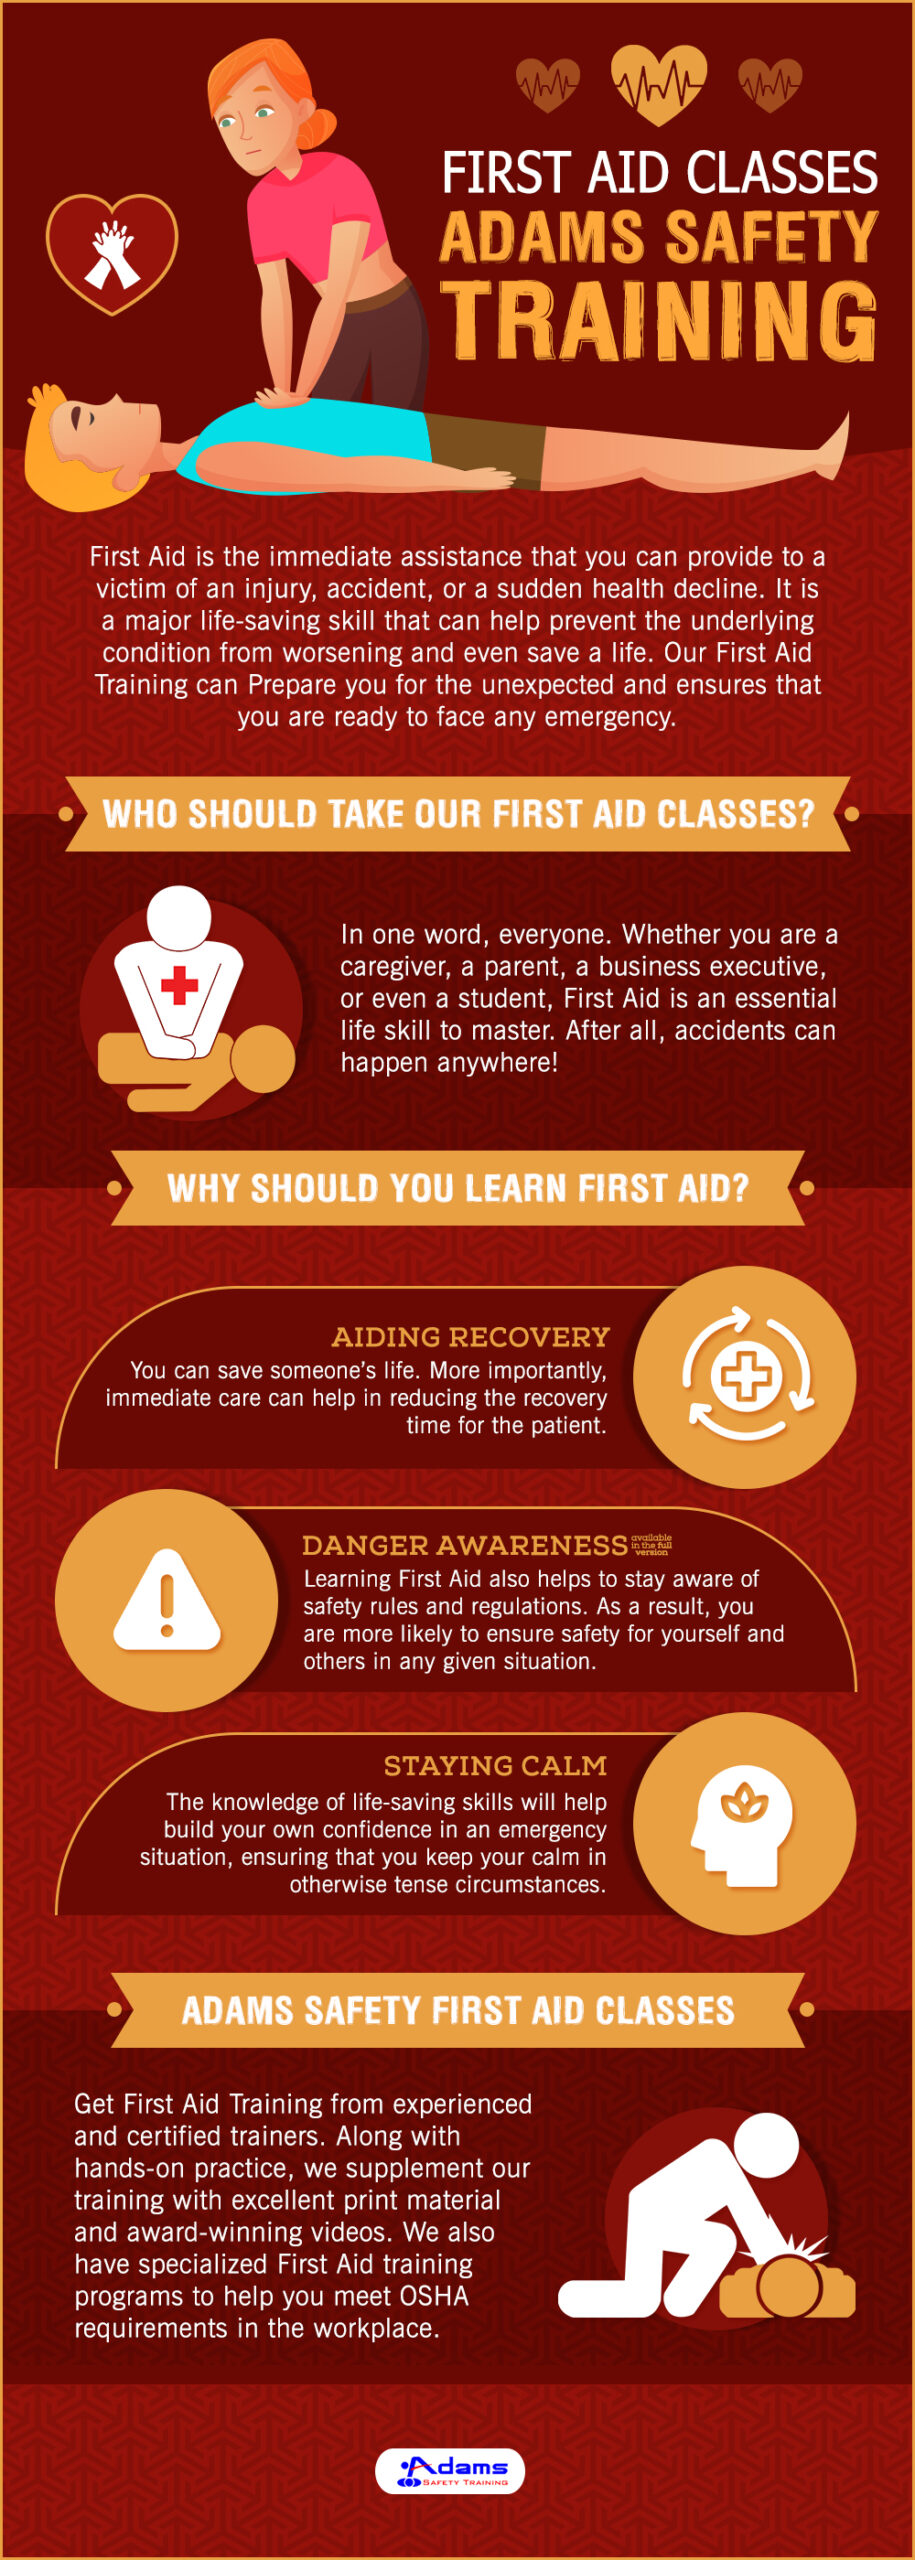 FIRST AID CLASSES – ADAMS SAFETY TRAINING